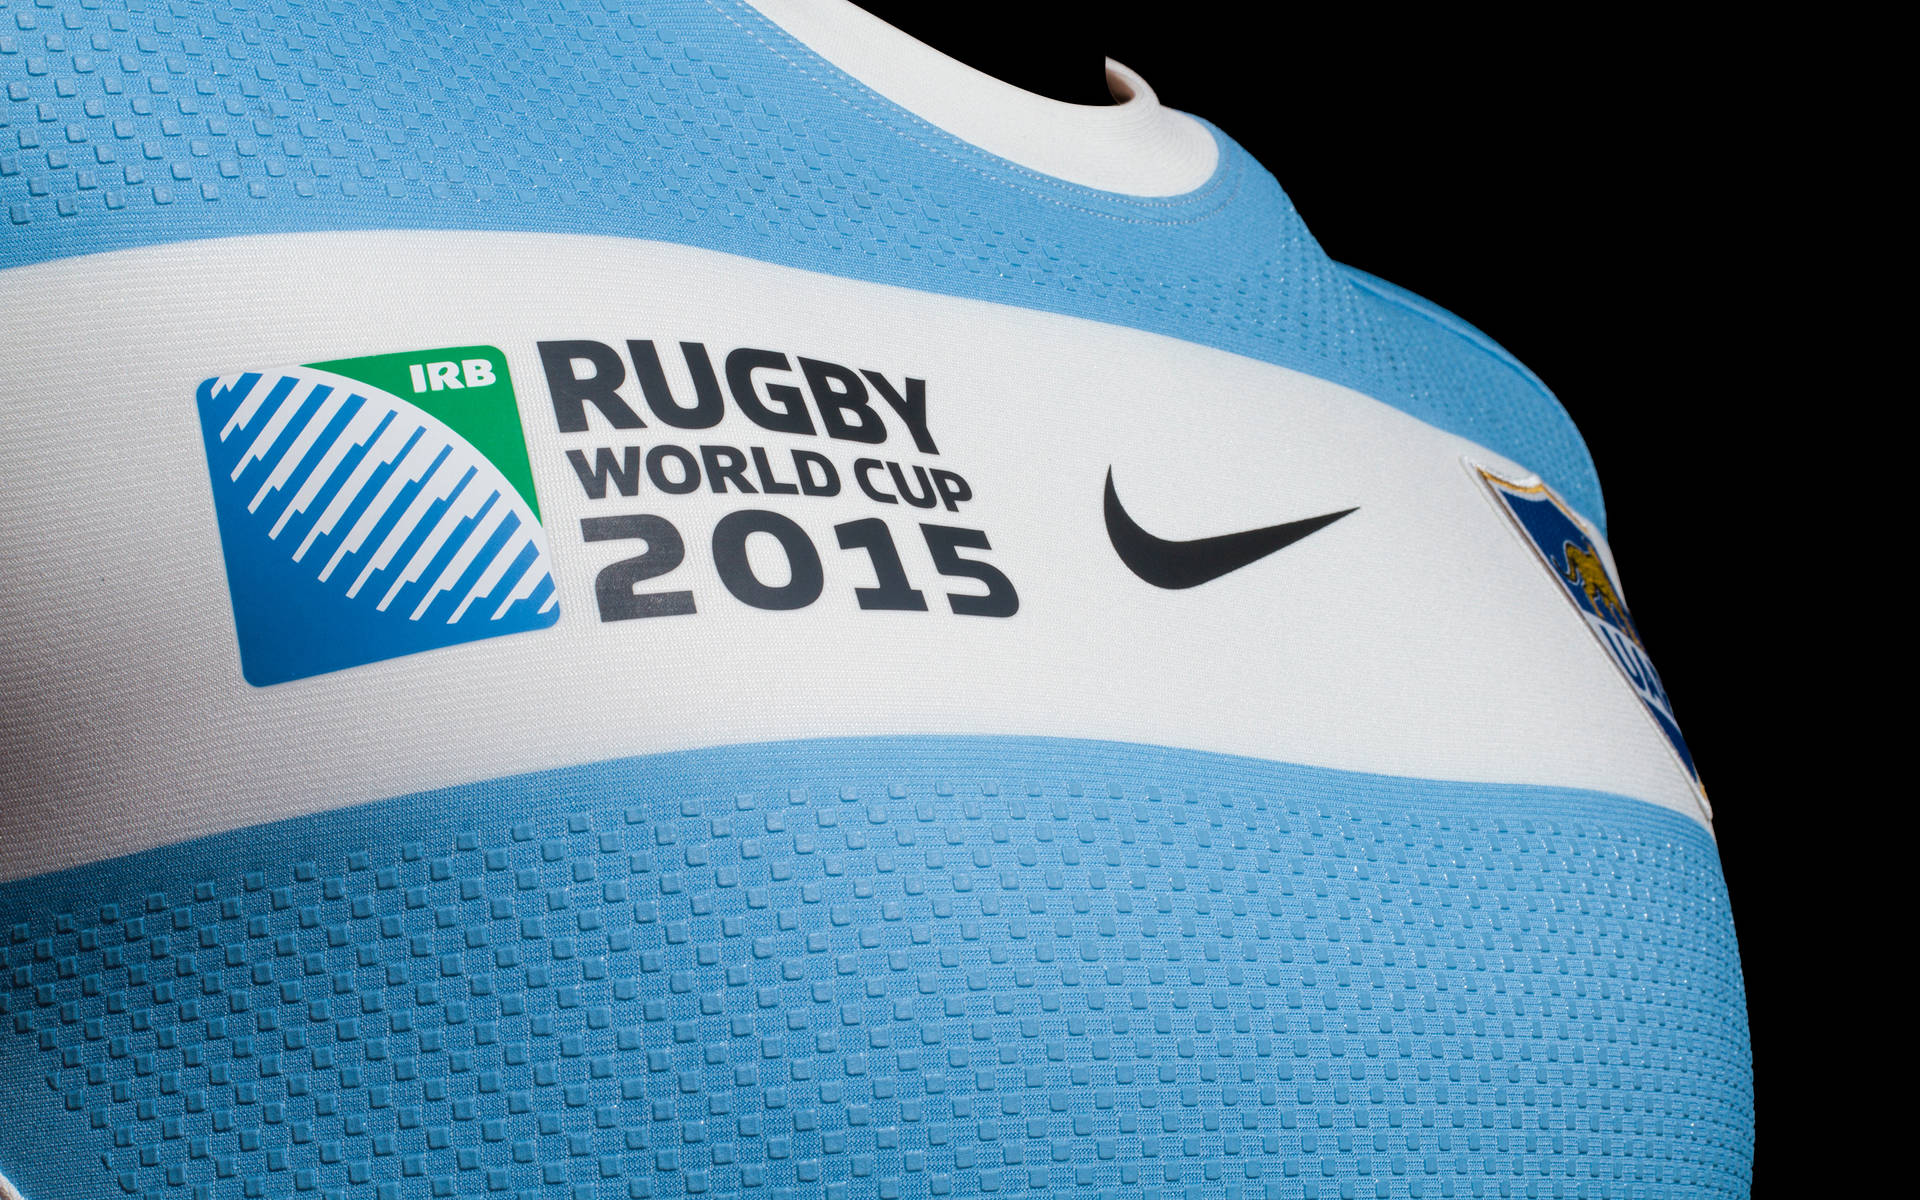 Rugby World Cup Nike Iphone Wallpaper